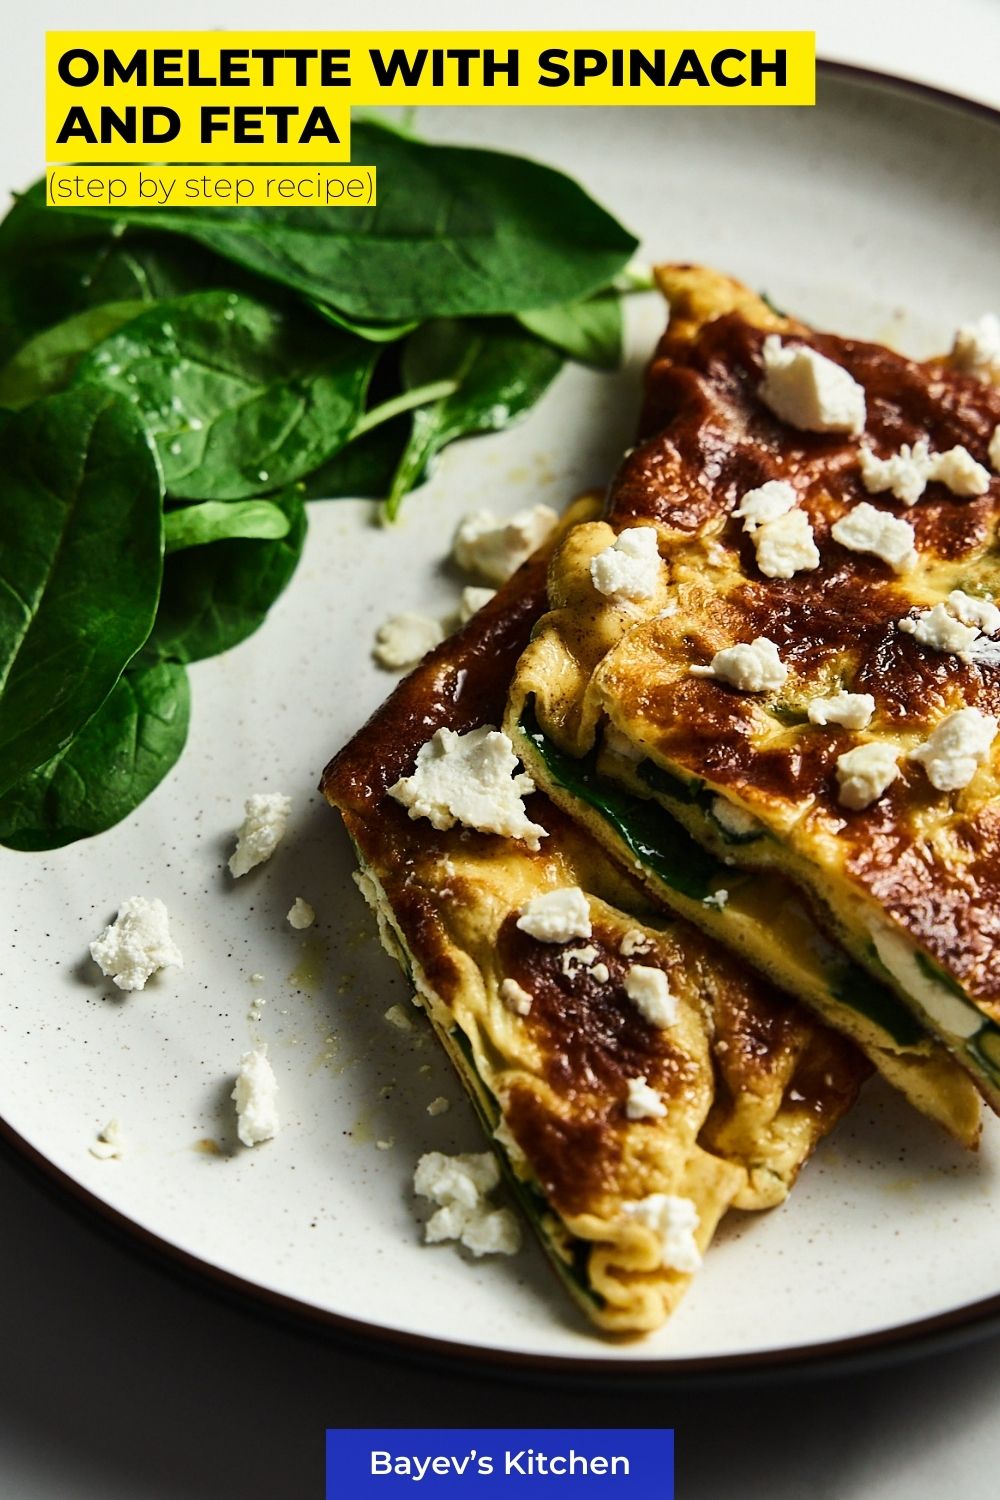 Omelette with Spinach and Feta by bayevskitchen.com